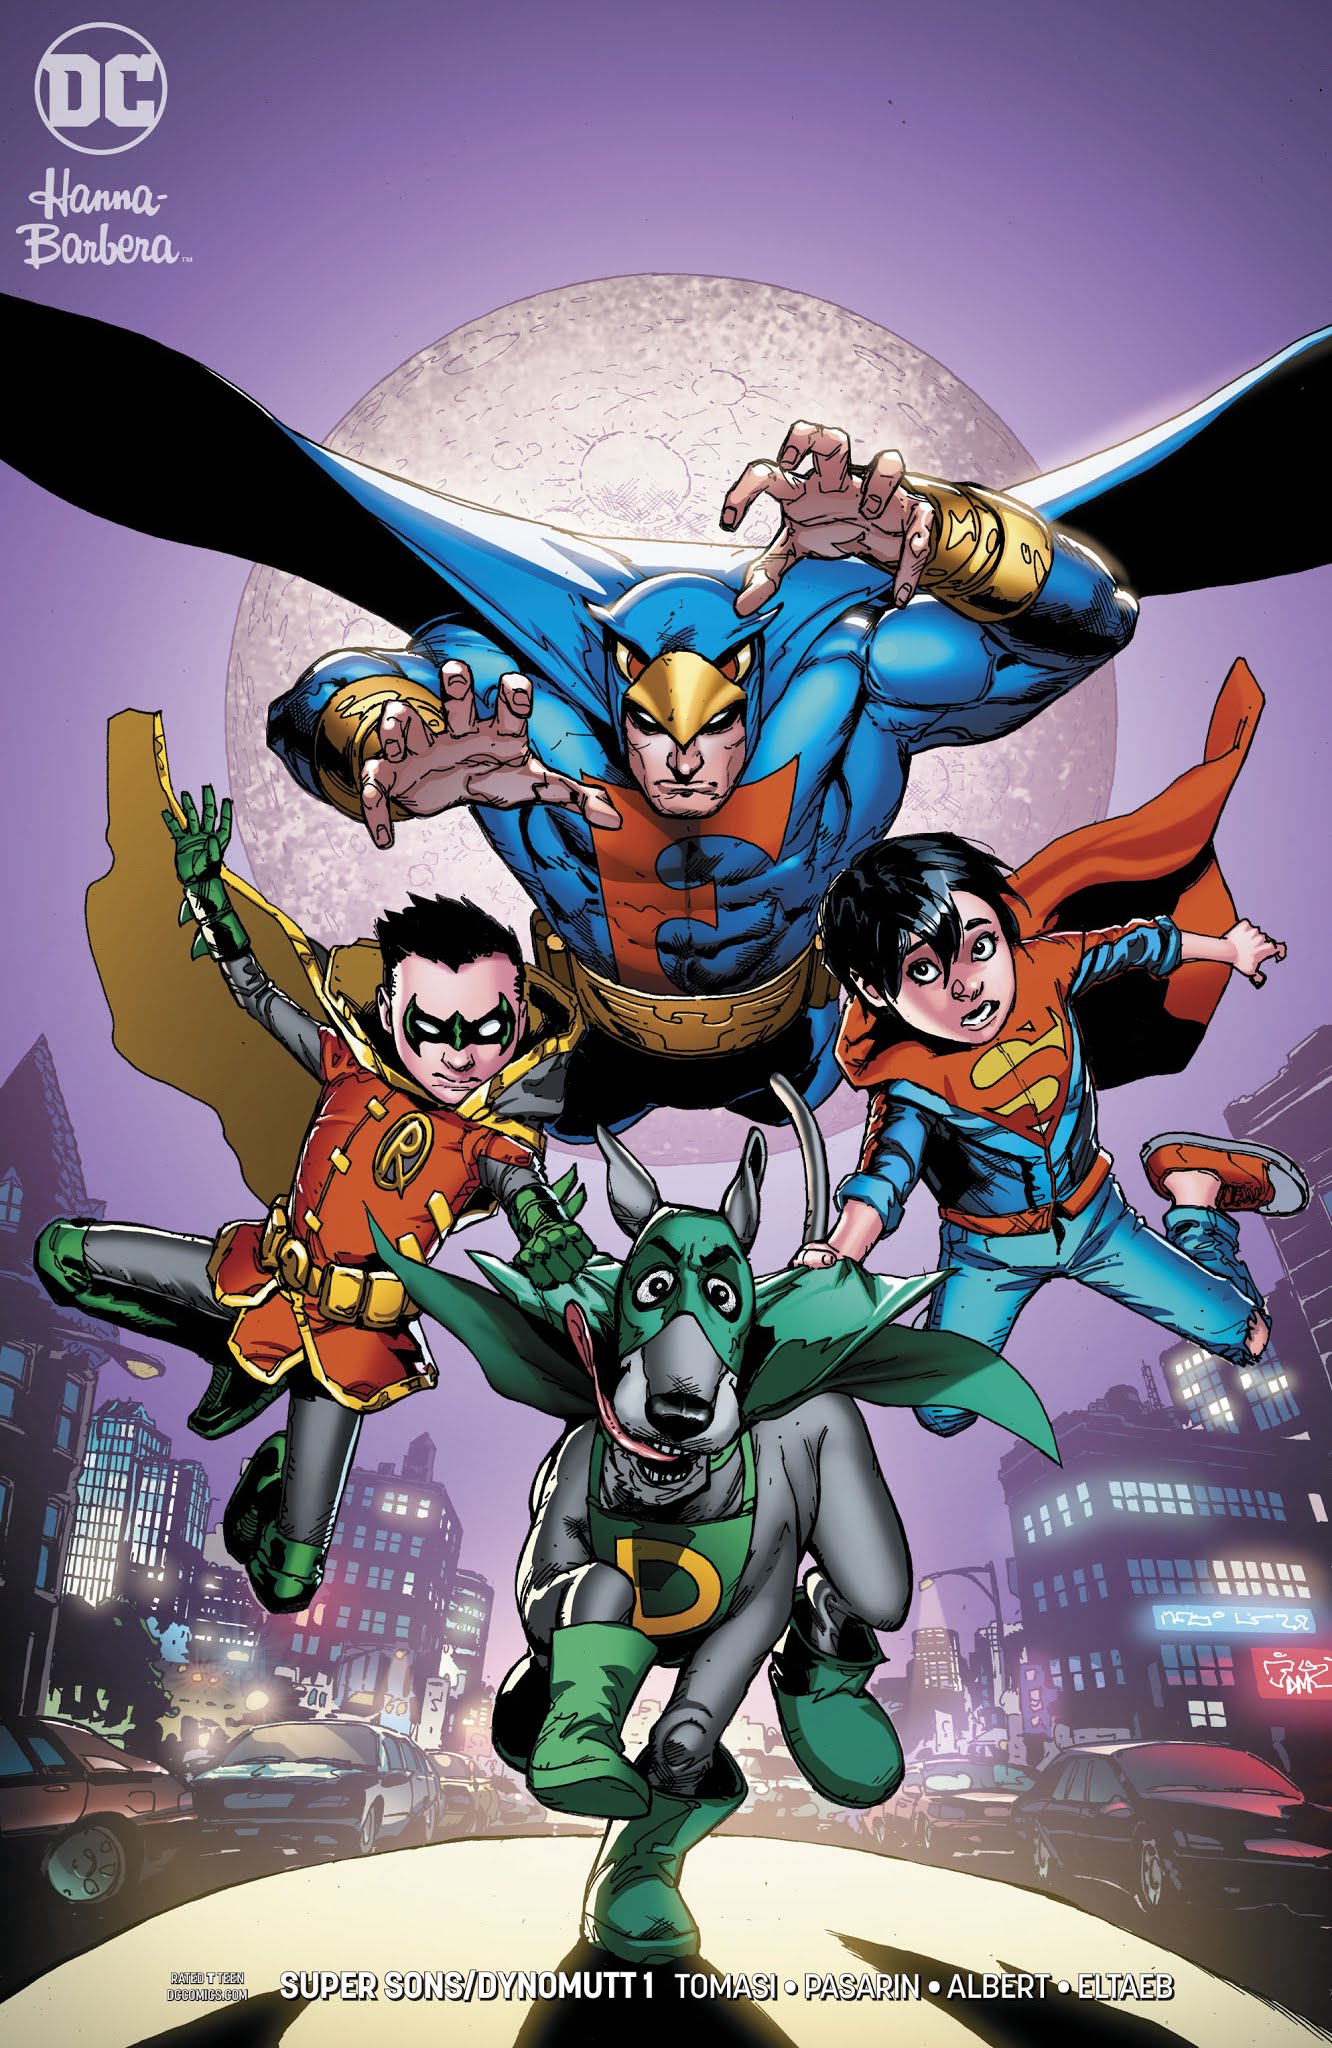 Read online DC Meets Hanna-Barbera comic -  Issue # Issue Super Sons - Dynomutt - 3